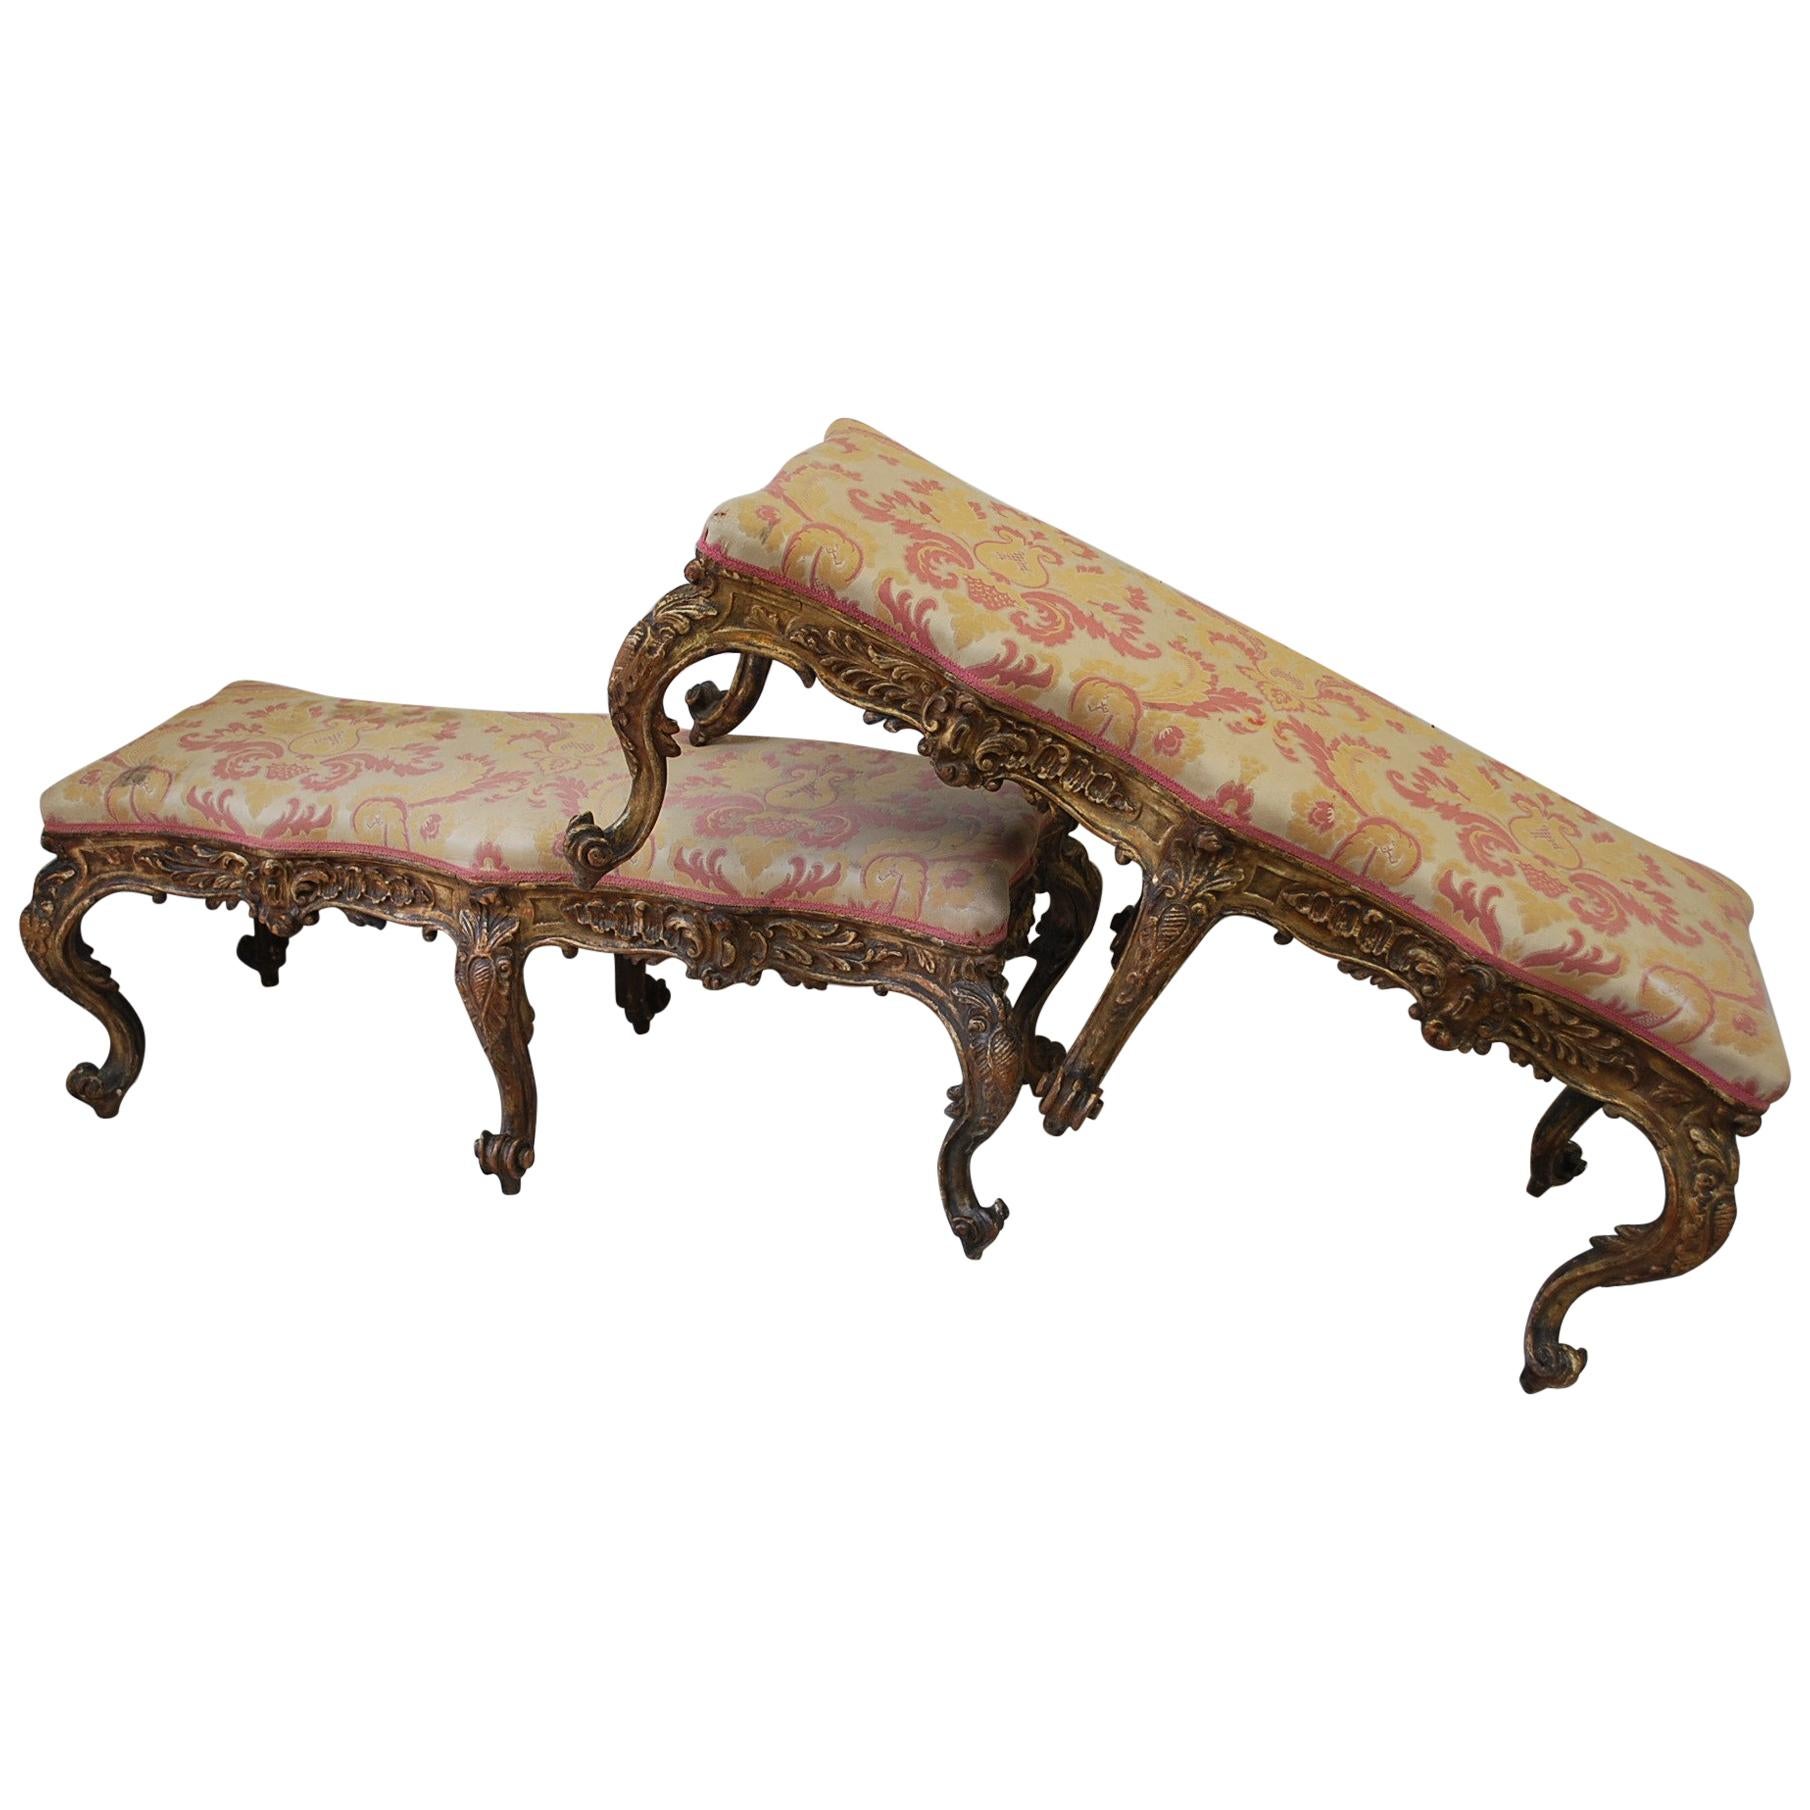 Pair of Large 18th century Rococo style Italian Giltwood Stools, circa 1860 For Sale